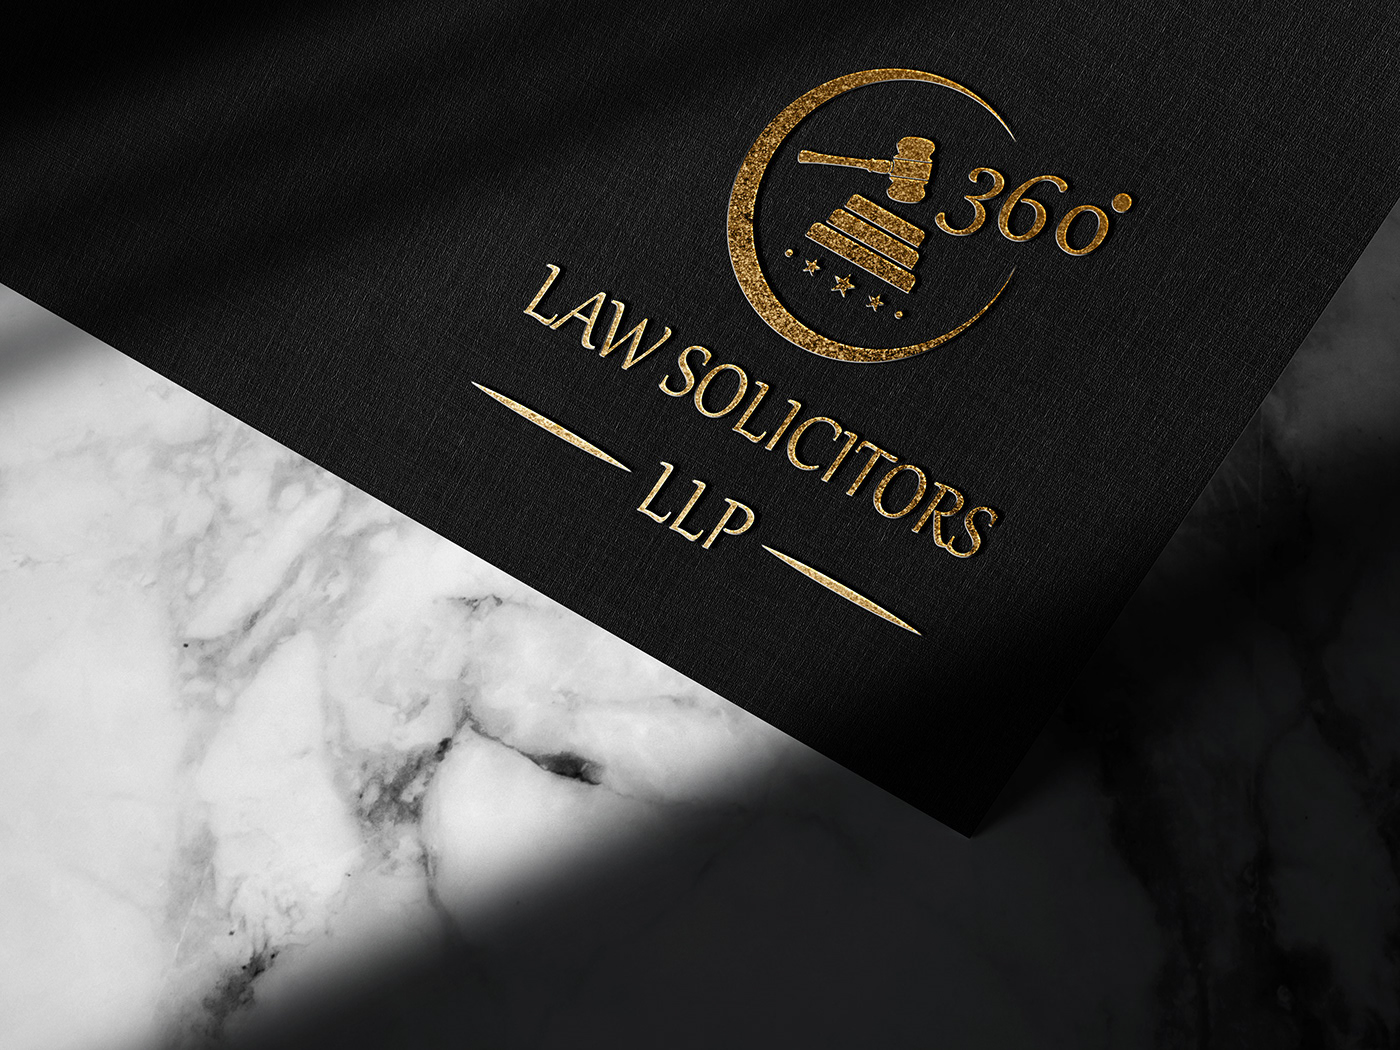 Logo Design company logo law firm lawer advocate attorney Justice firm logo law lawer logo